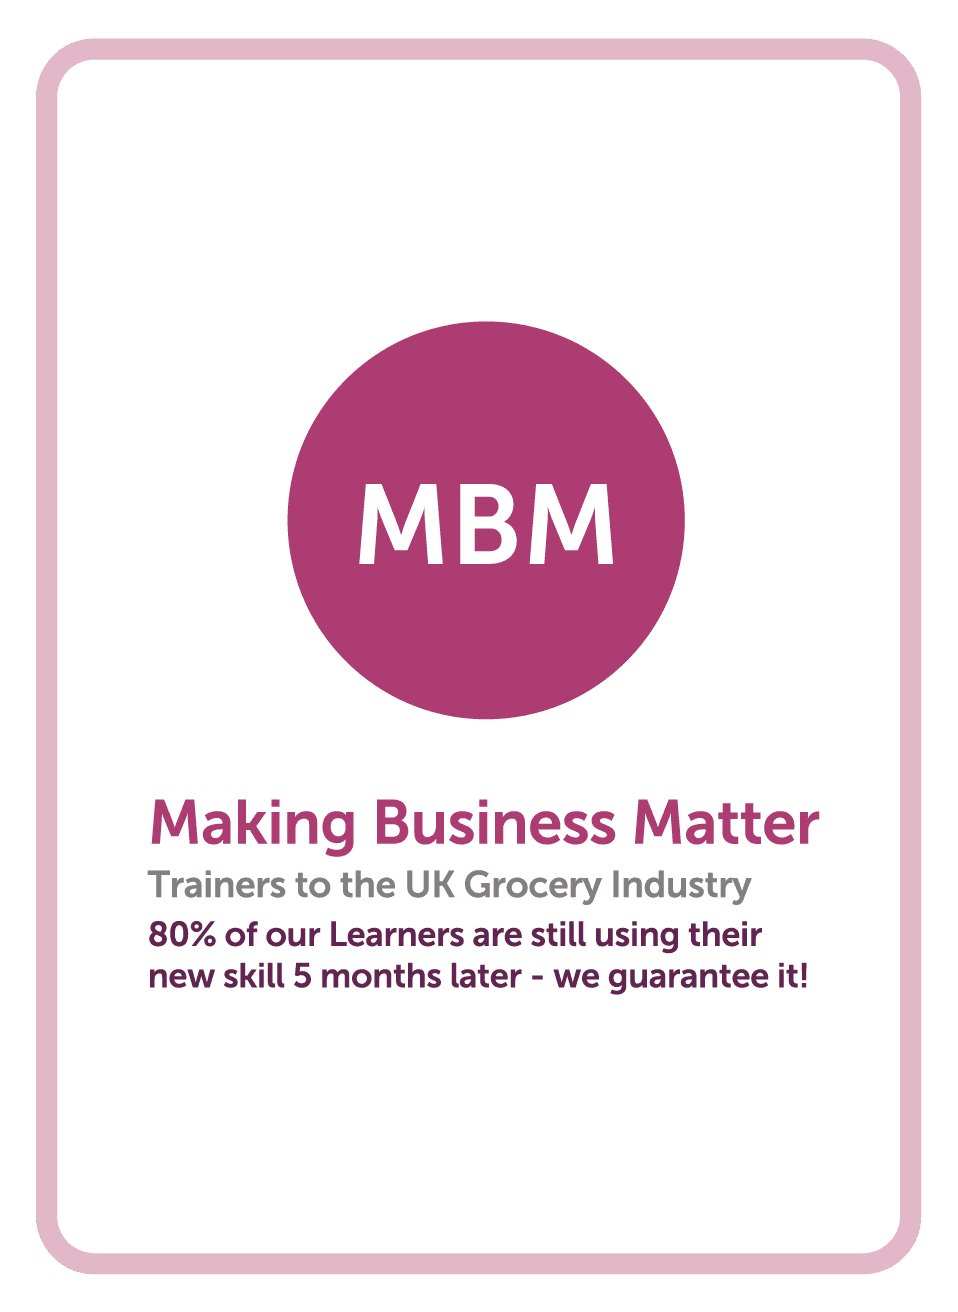 C-suite coaching card titled MBM